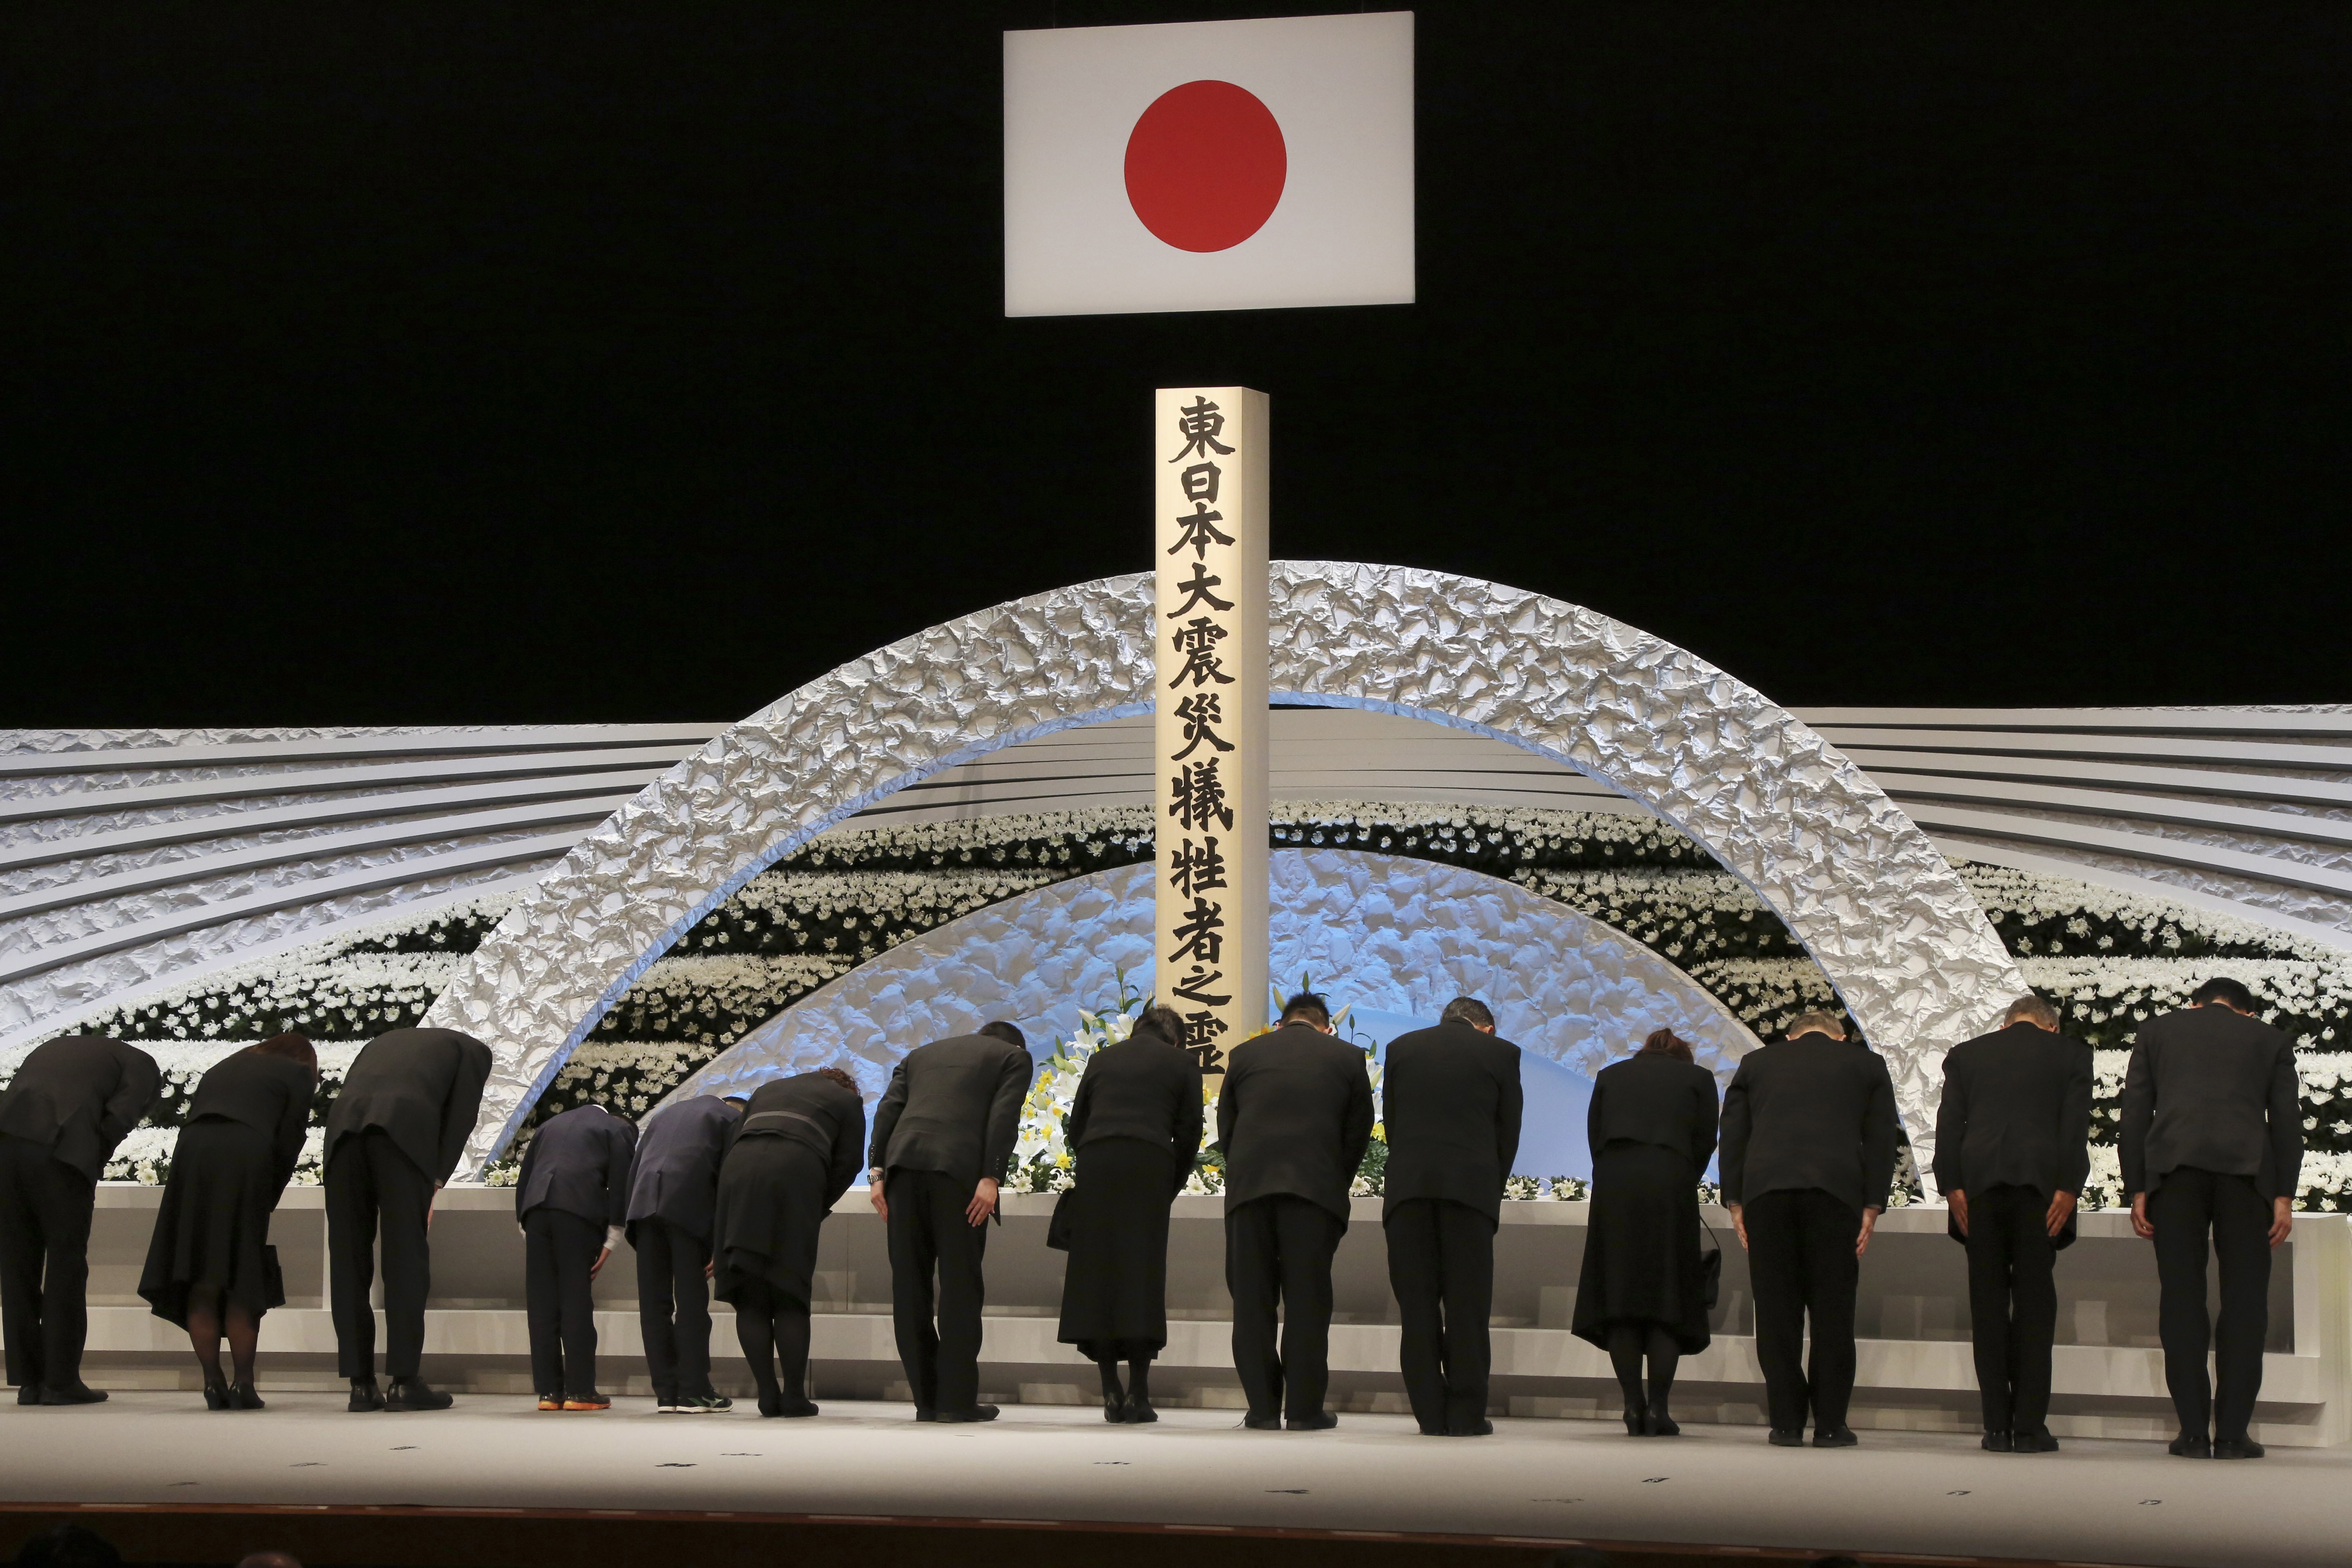 Bereaved family members bow in front of the altar for the victims of the March 11, 2011 earthquake and tsunami during the national memorial service in Tokyo Saturday, March 11, 2017. Japan marks Saturday the sixth anniversary of the 2011 disaster in which more than 18,000 people died or went missing. (AP Photo/Koji Sasahara)Pool